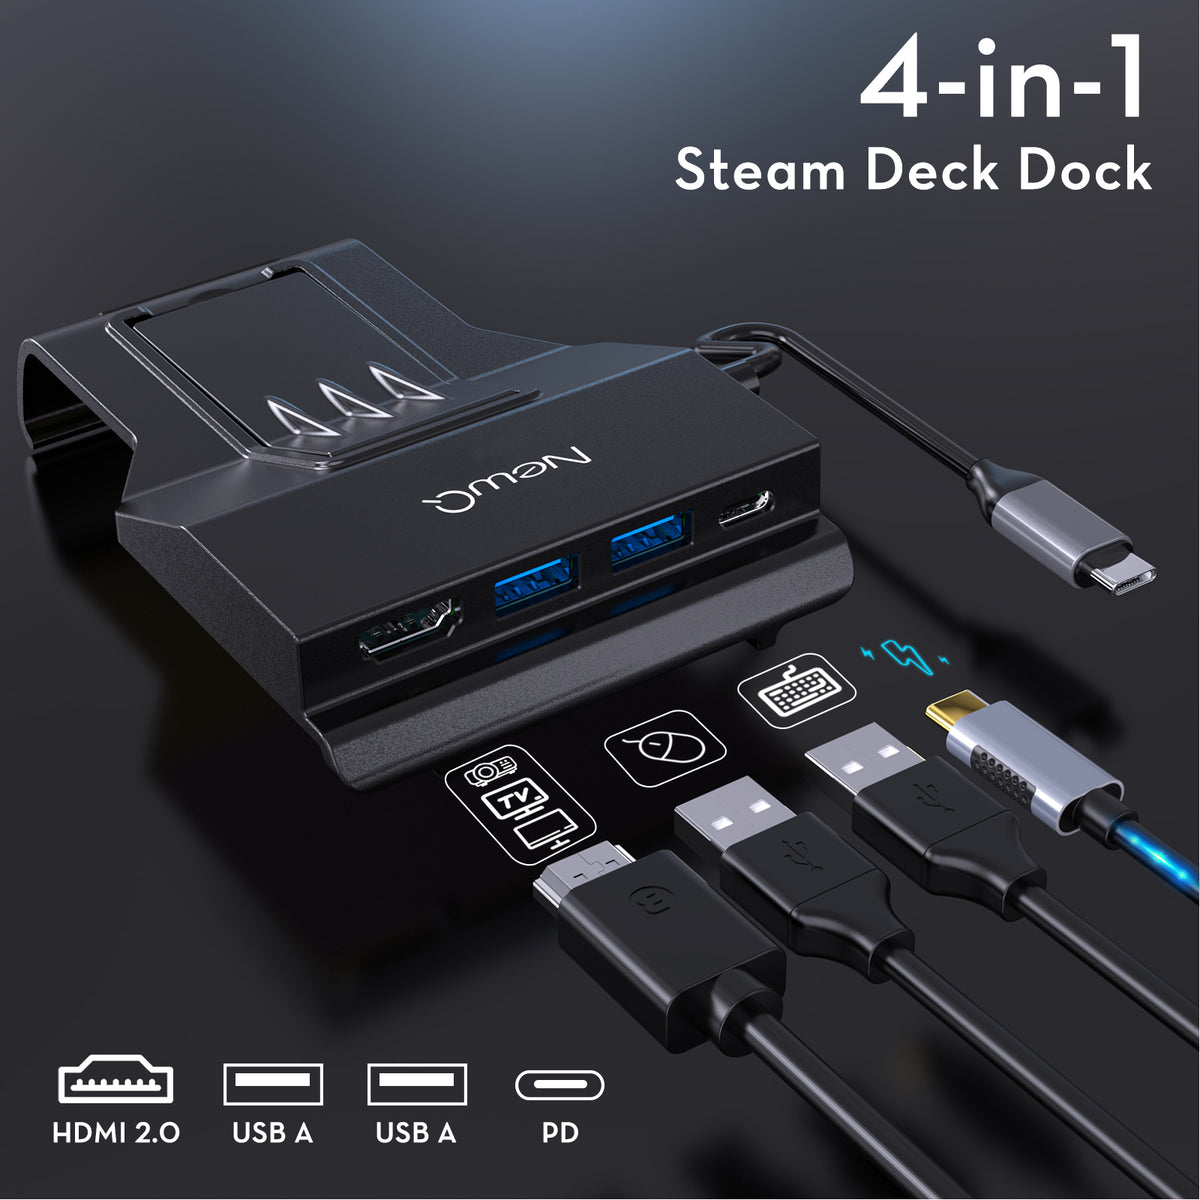 The upcoming Steam Deck Dock got an upgrade, now called a 'Docking Station